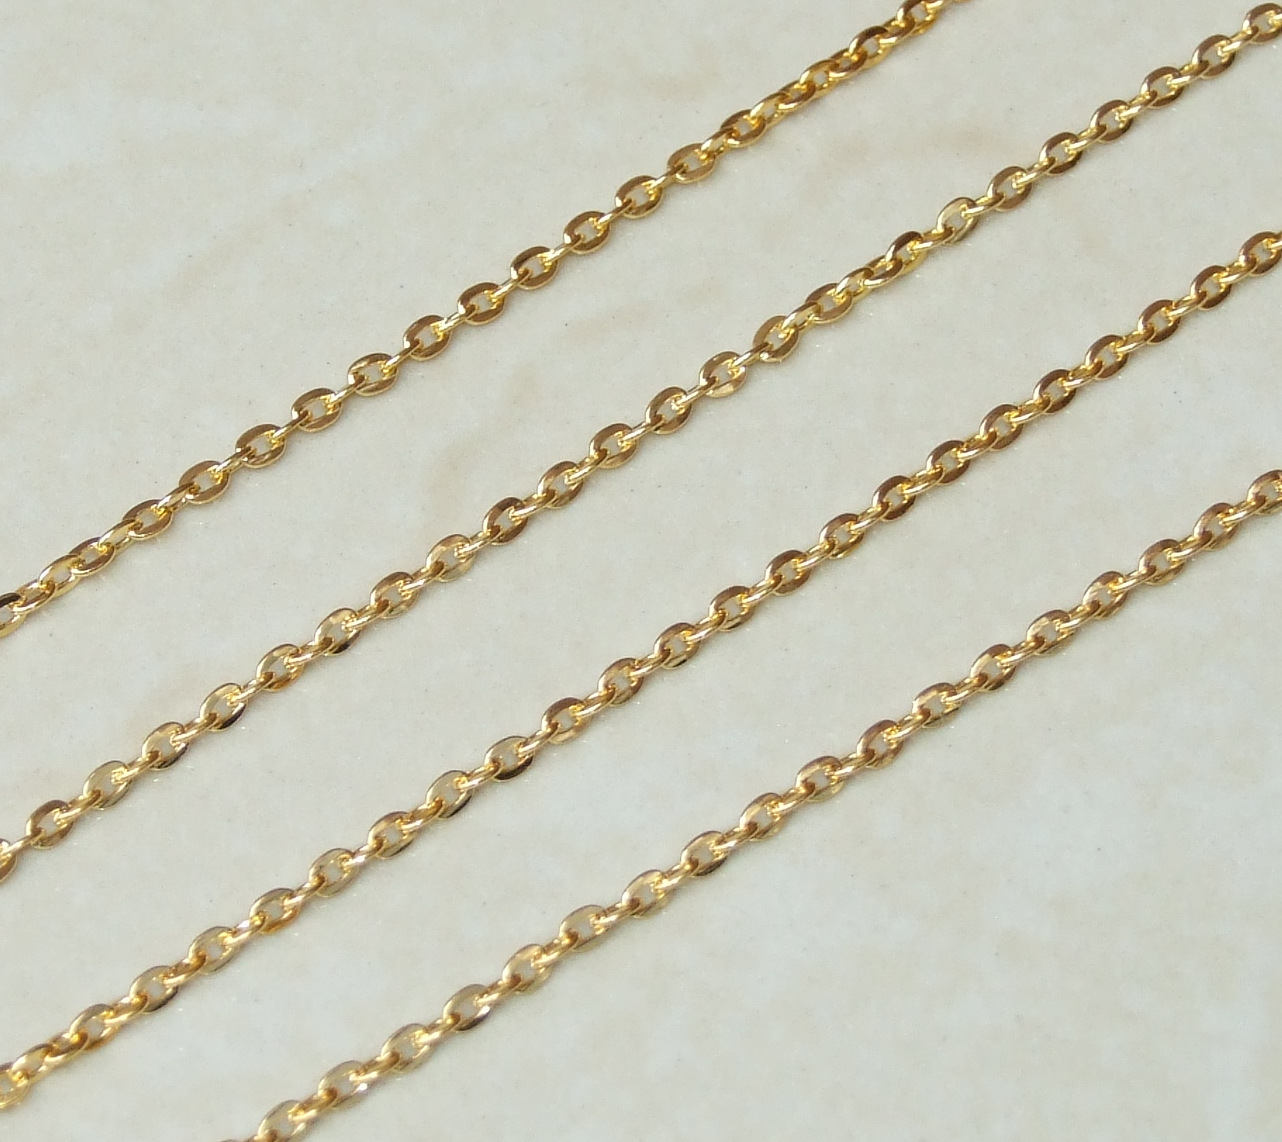 Oval Link Cable Chain, Flat Cable Chain, Jewelry Chain, Necklace Chain, Gold Plated Chain, Body Chain, Bulk Chain, 3.5mm x 3mm, 25Y-G